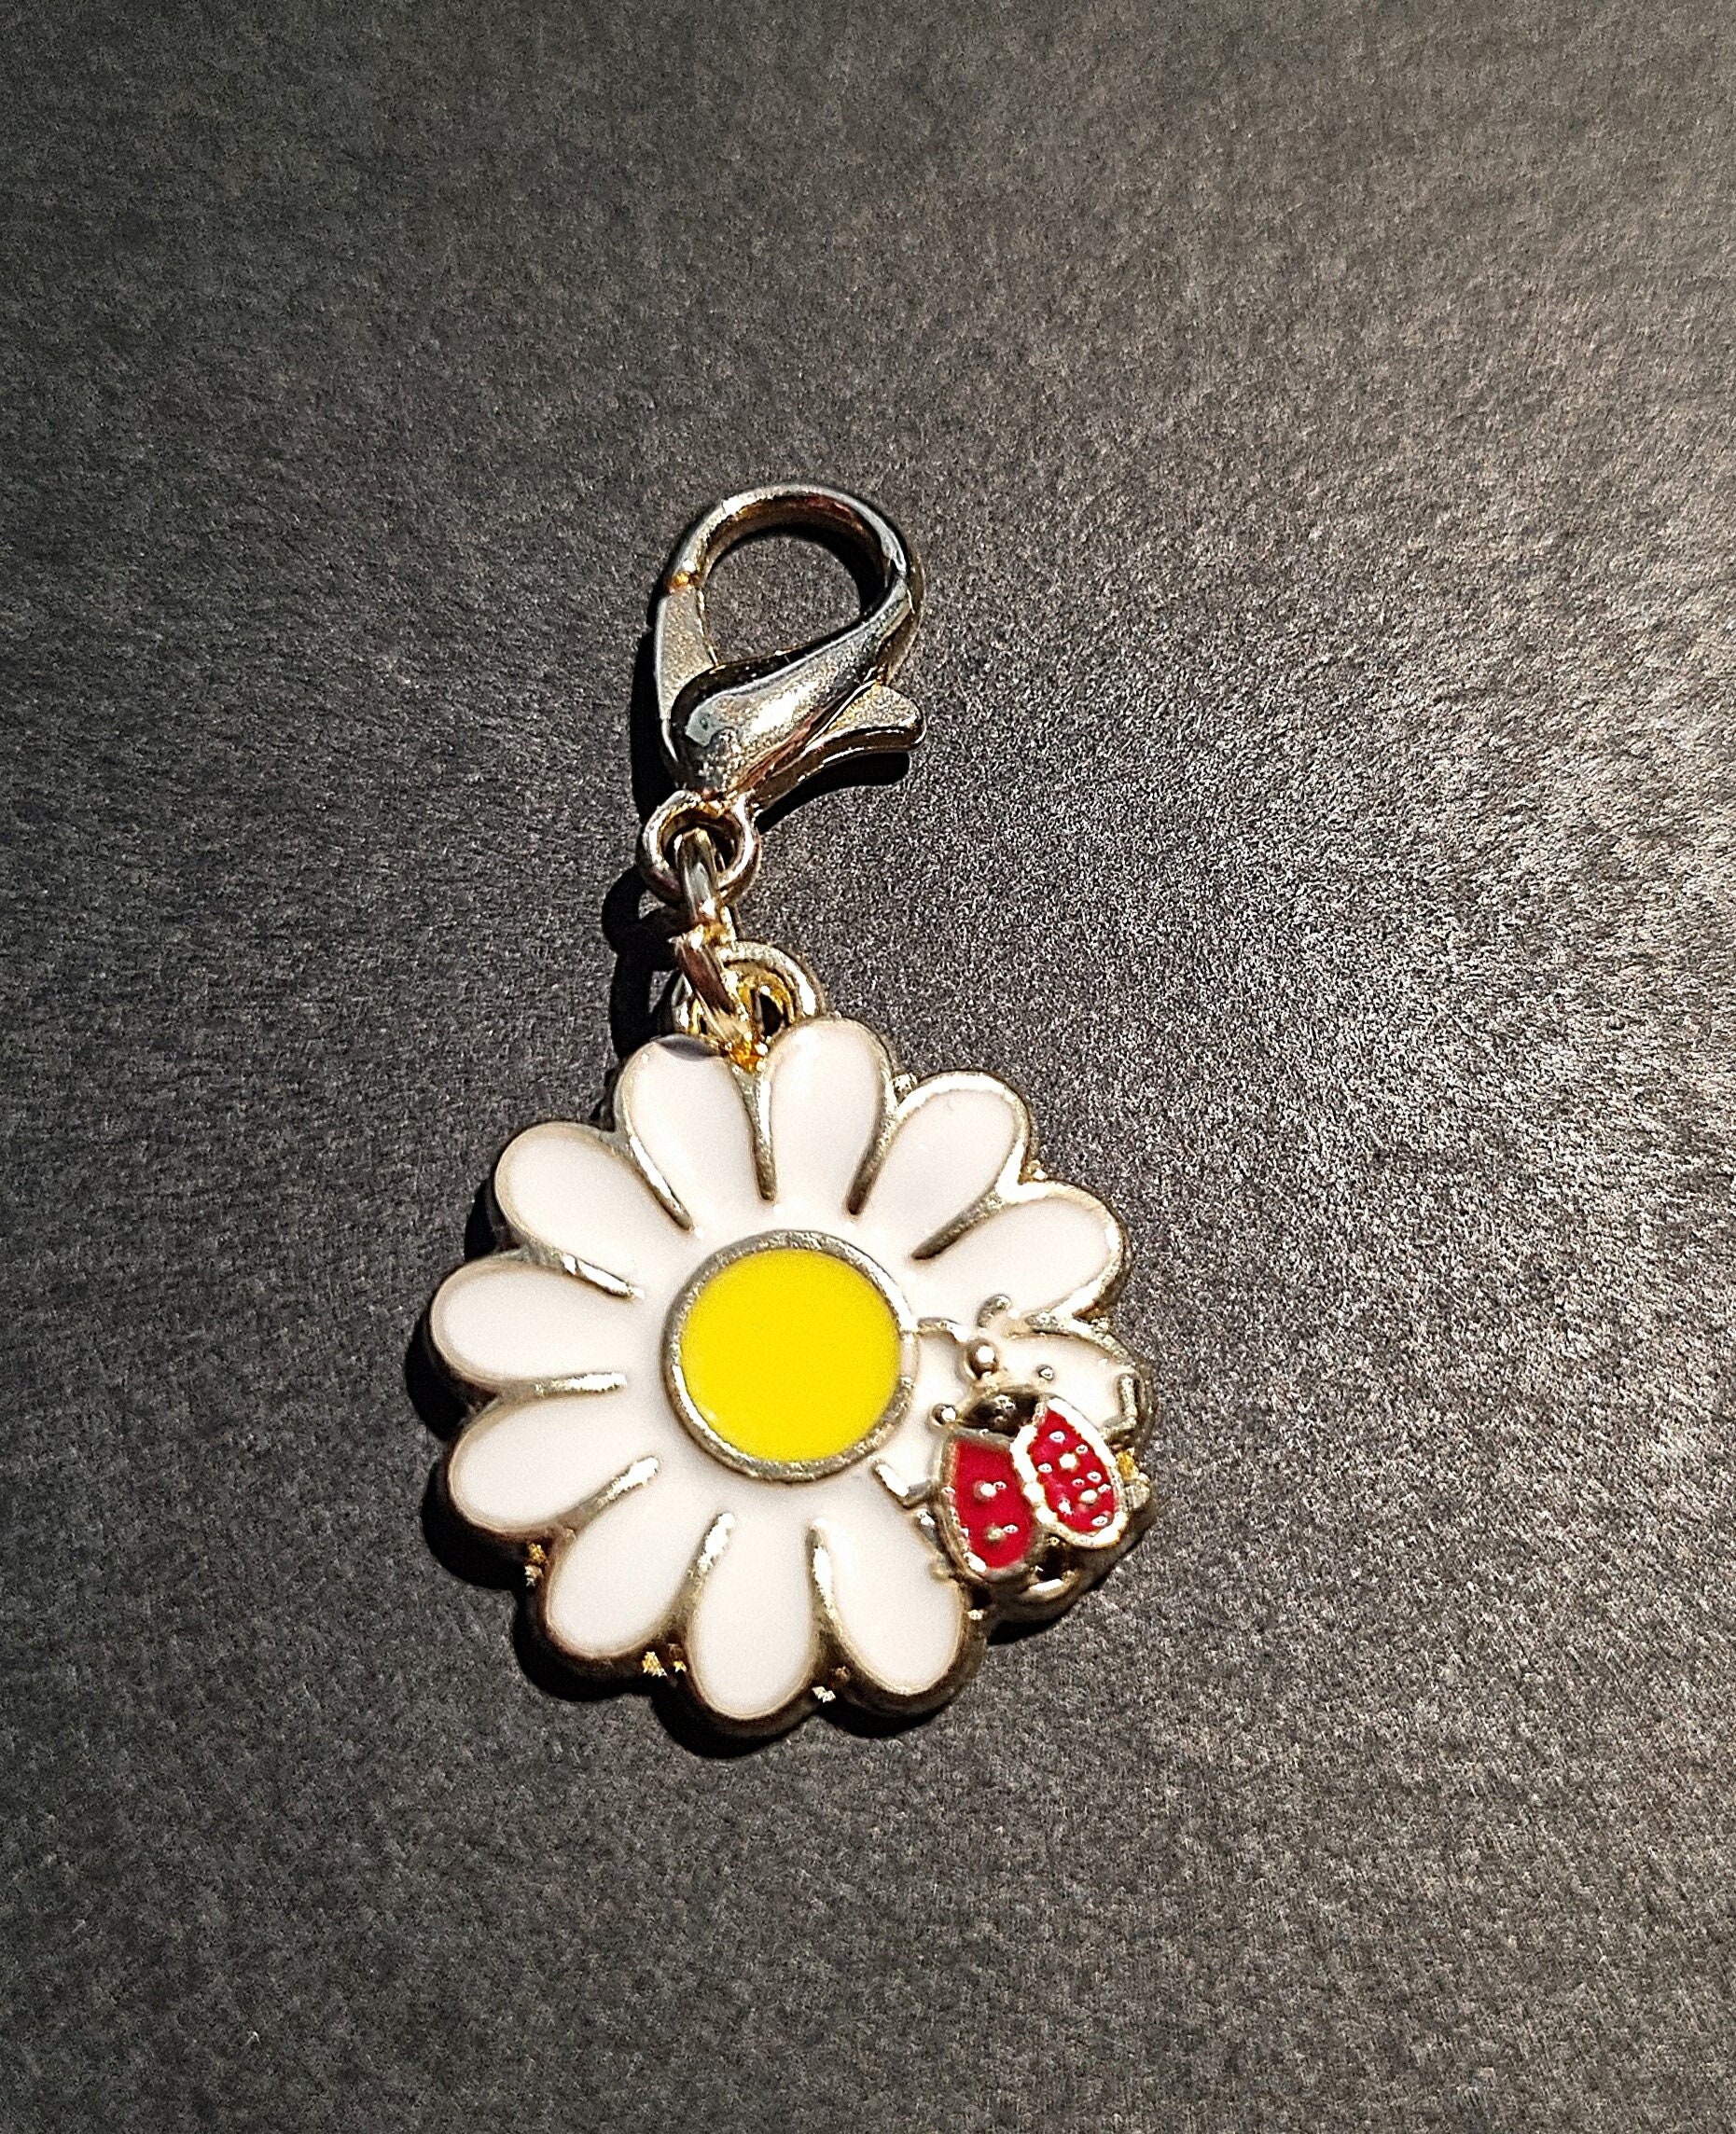 Vintage Style Flower Pendant, Daisy Charm, Spring Beads, Daisy Flower  Charms for Jewelry Making 